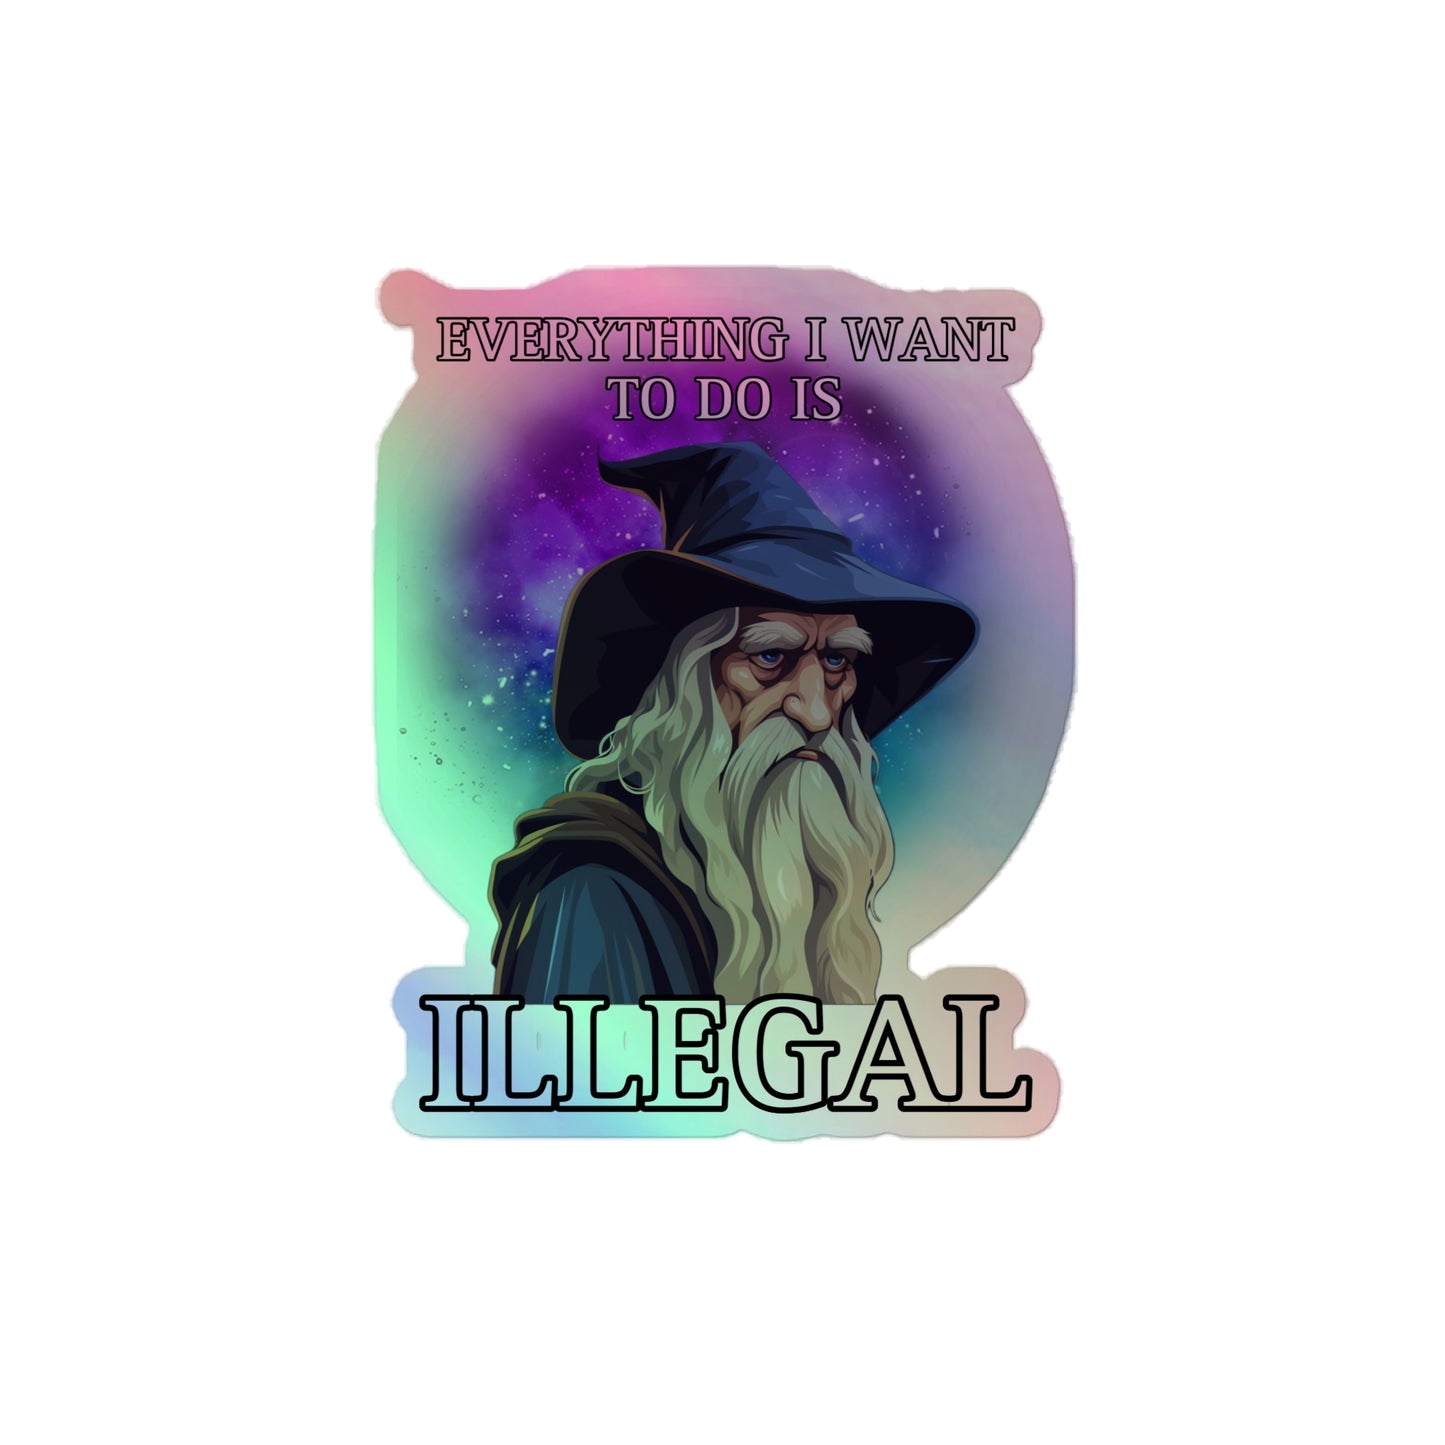 Everything I want to do is illegal (sticker)